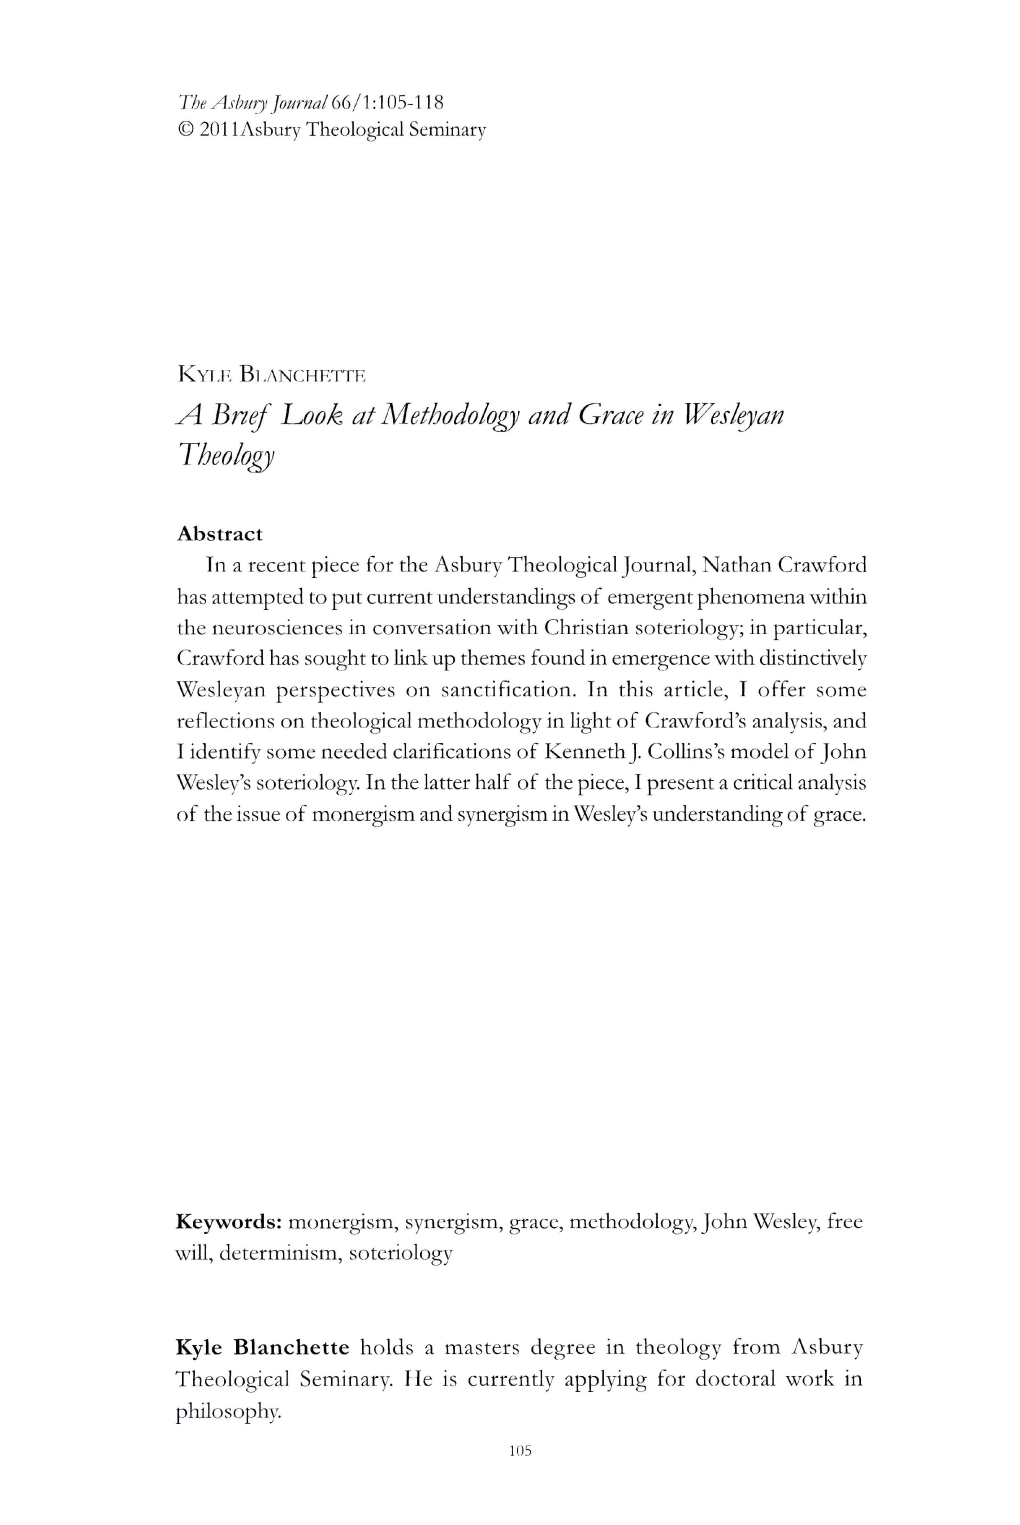 A Brief Look at Methodology and Grace in Wesleyan Theology